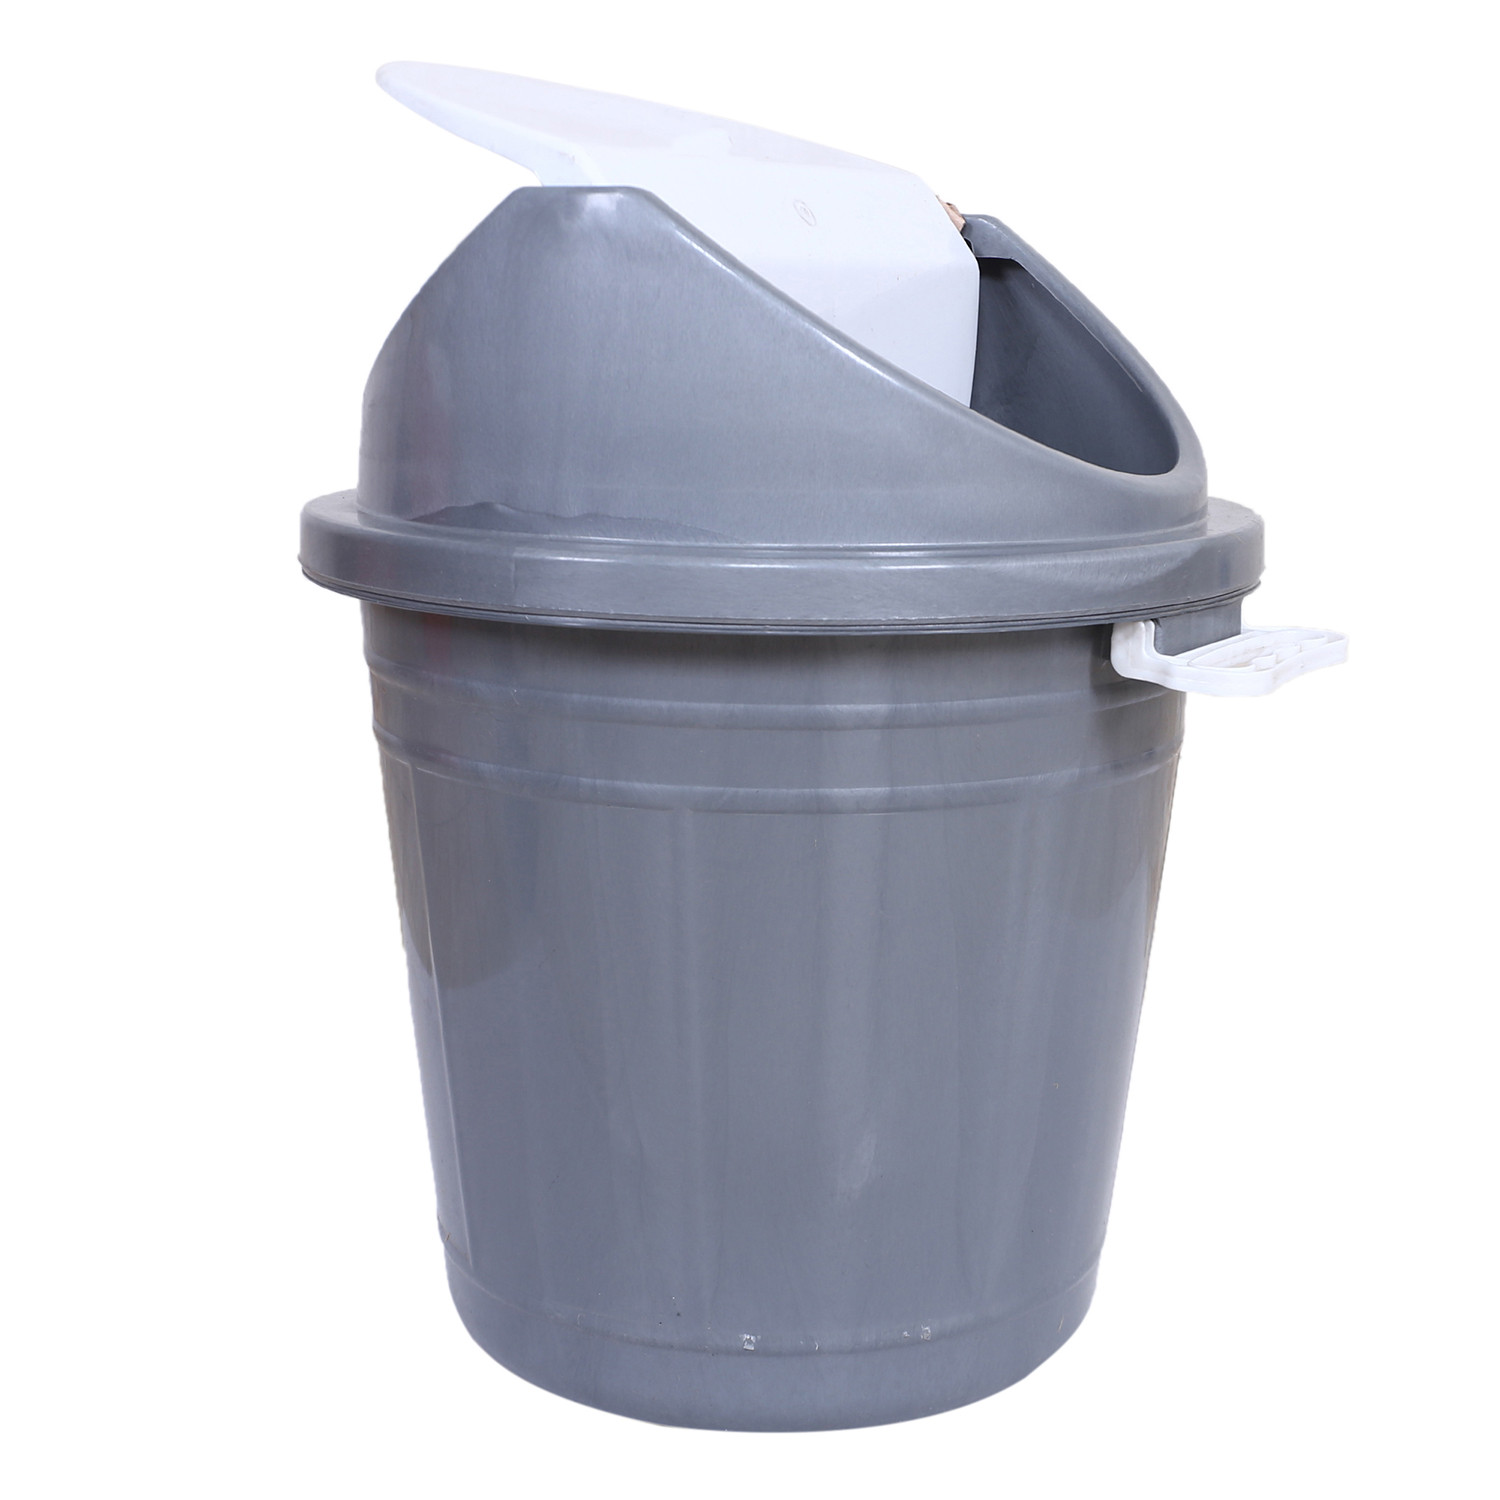 Kuber Industries Swing Top Lid Dustbin|Plastic Garbage Basket & Round Trash Can|Waste Bin with Lid For Home,Bathroom,Office,Washrooms,30 Litre (Gray)